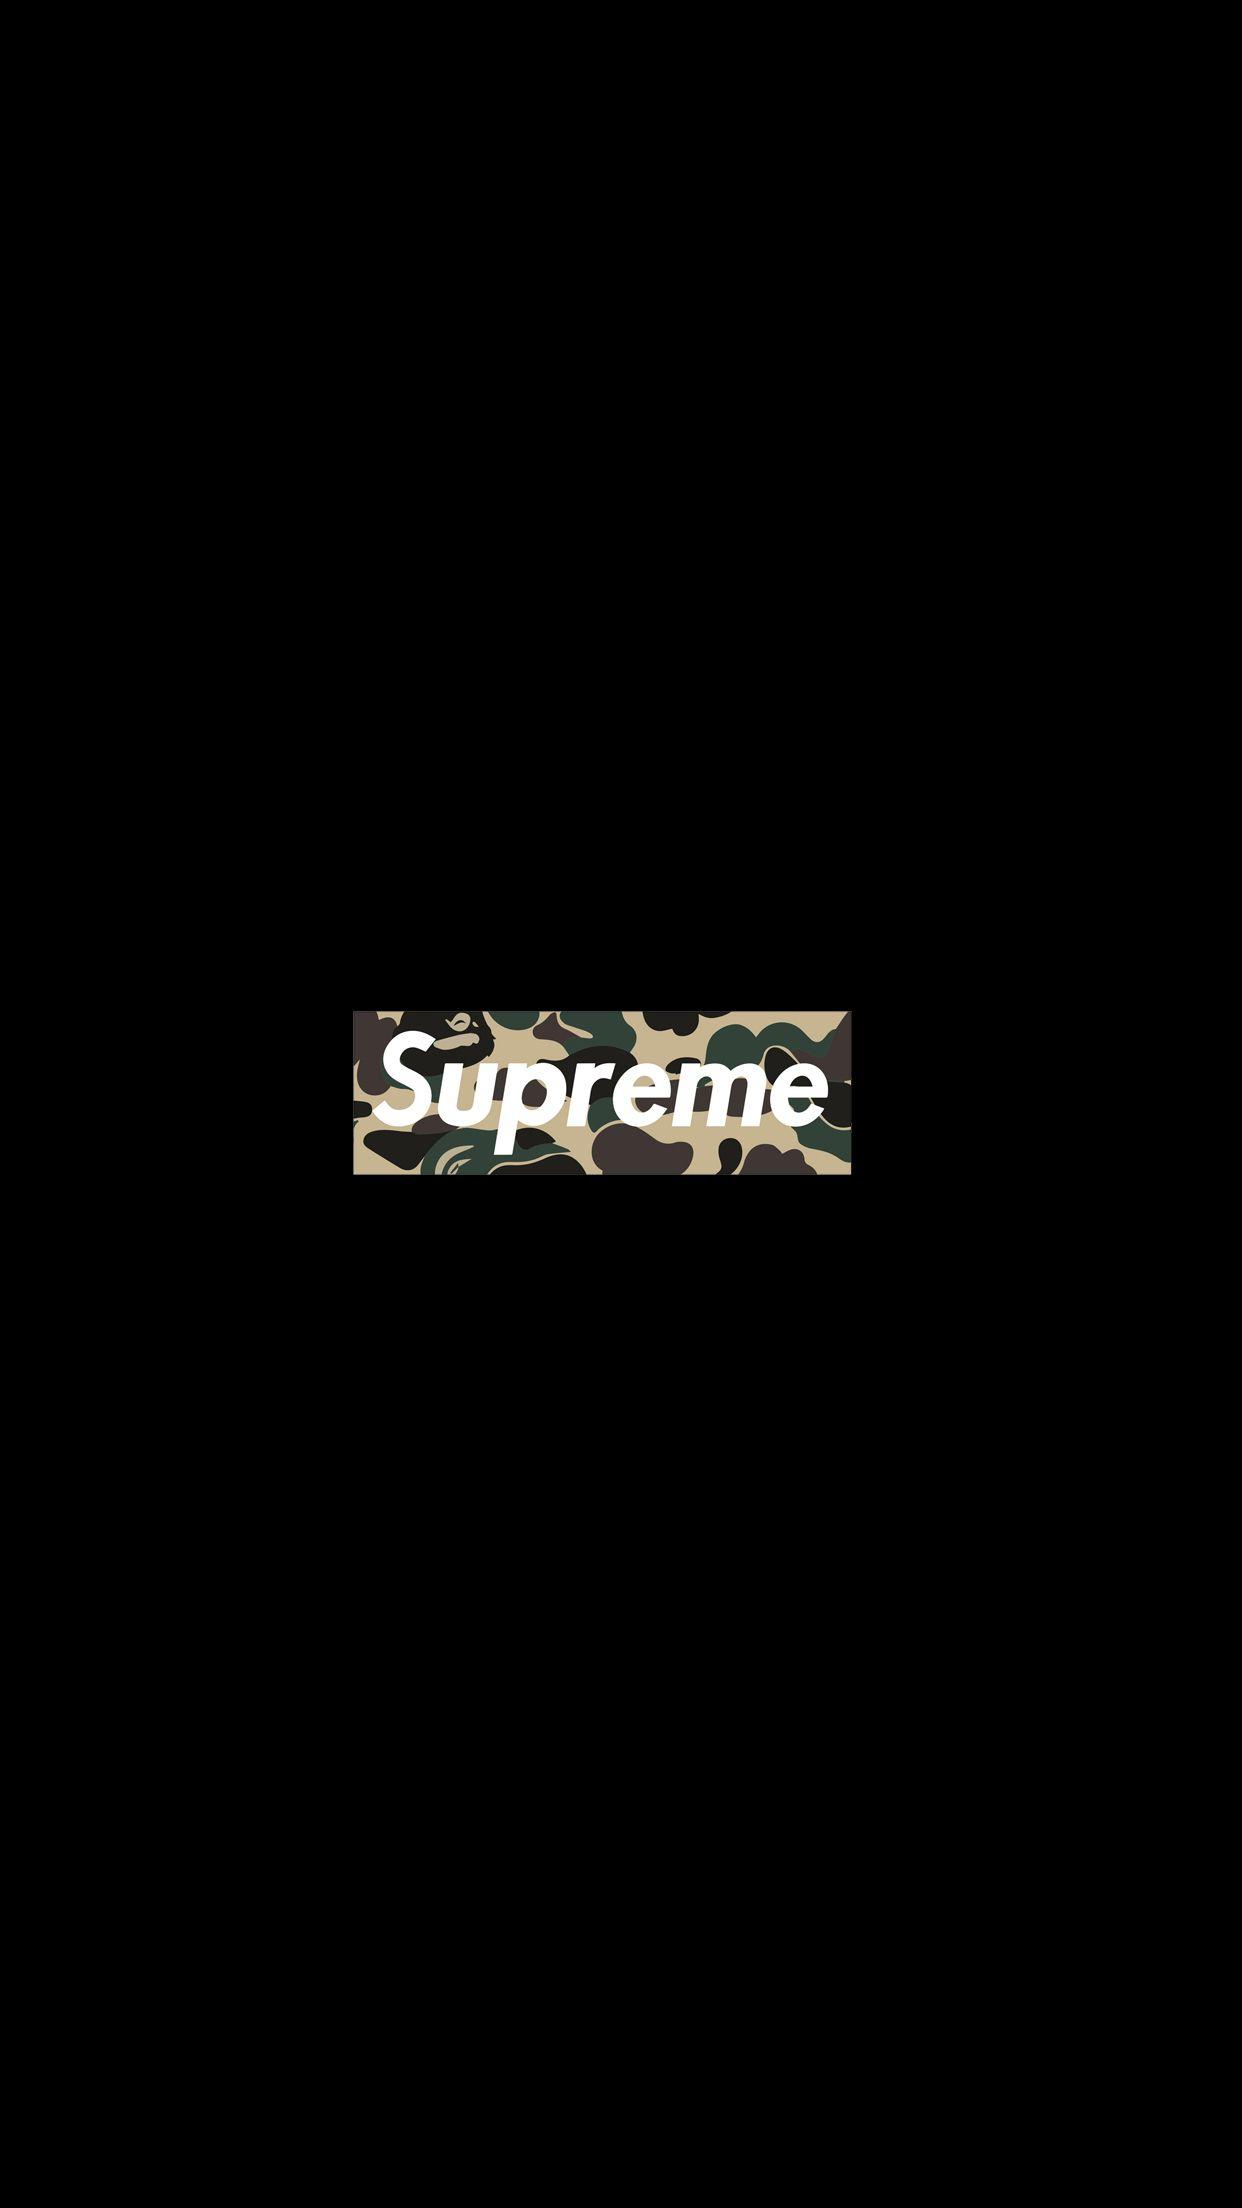 Some Supreme Wallpaper for iPhone!